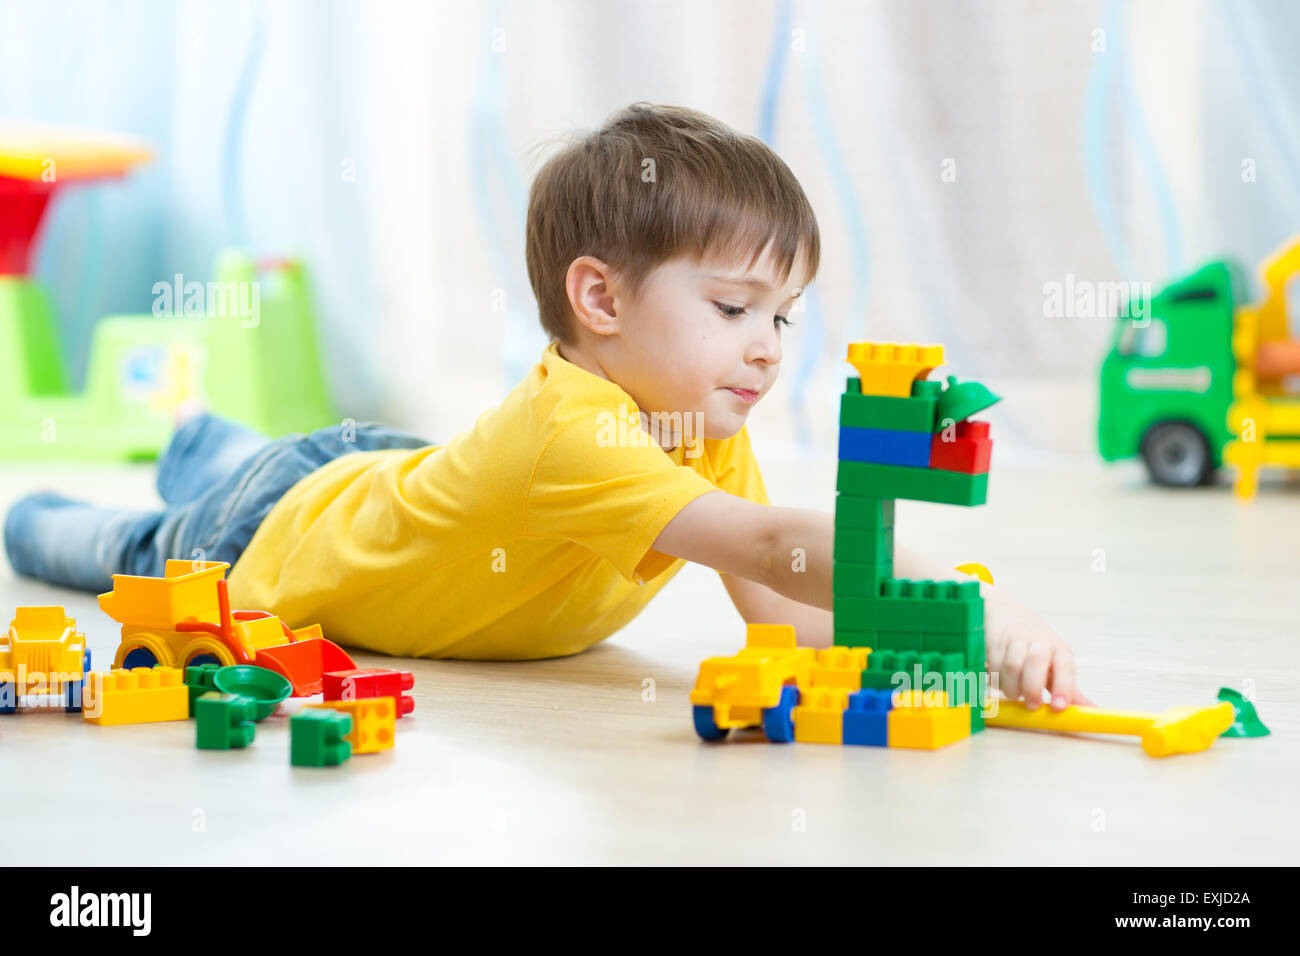 kid playing toy blocks at home Stock Photo